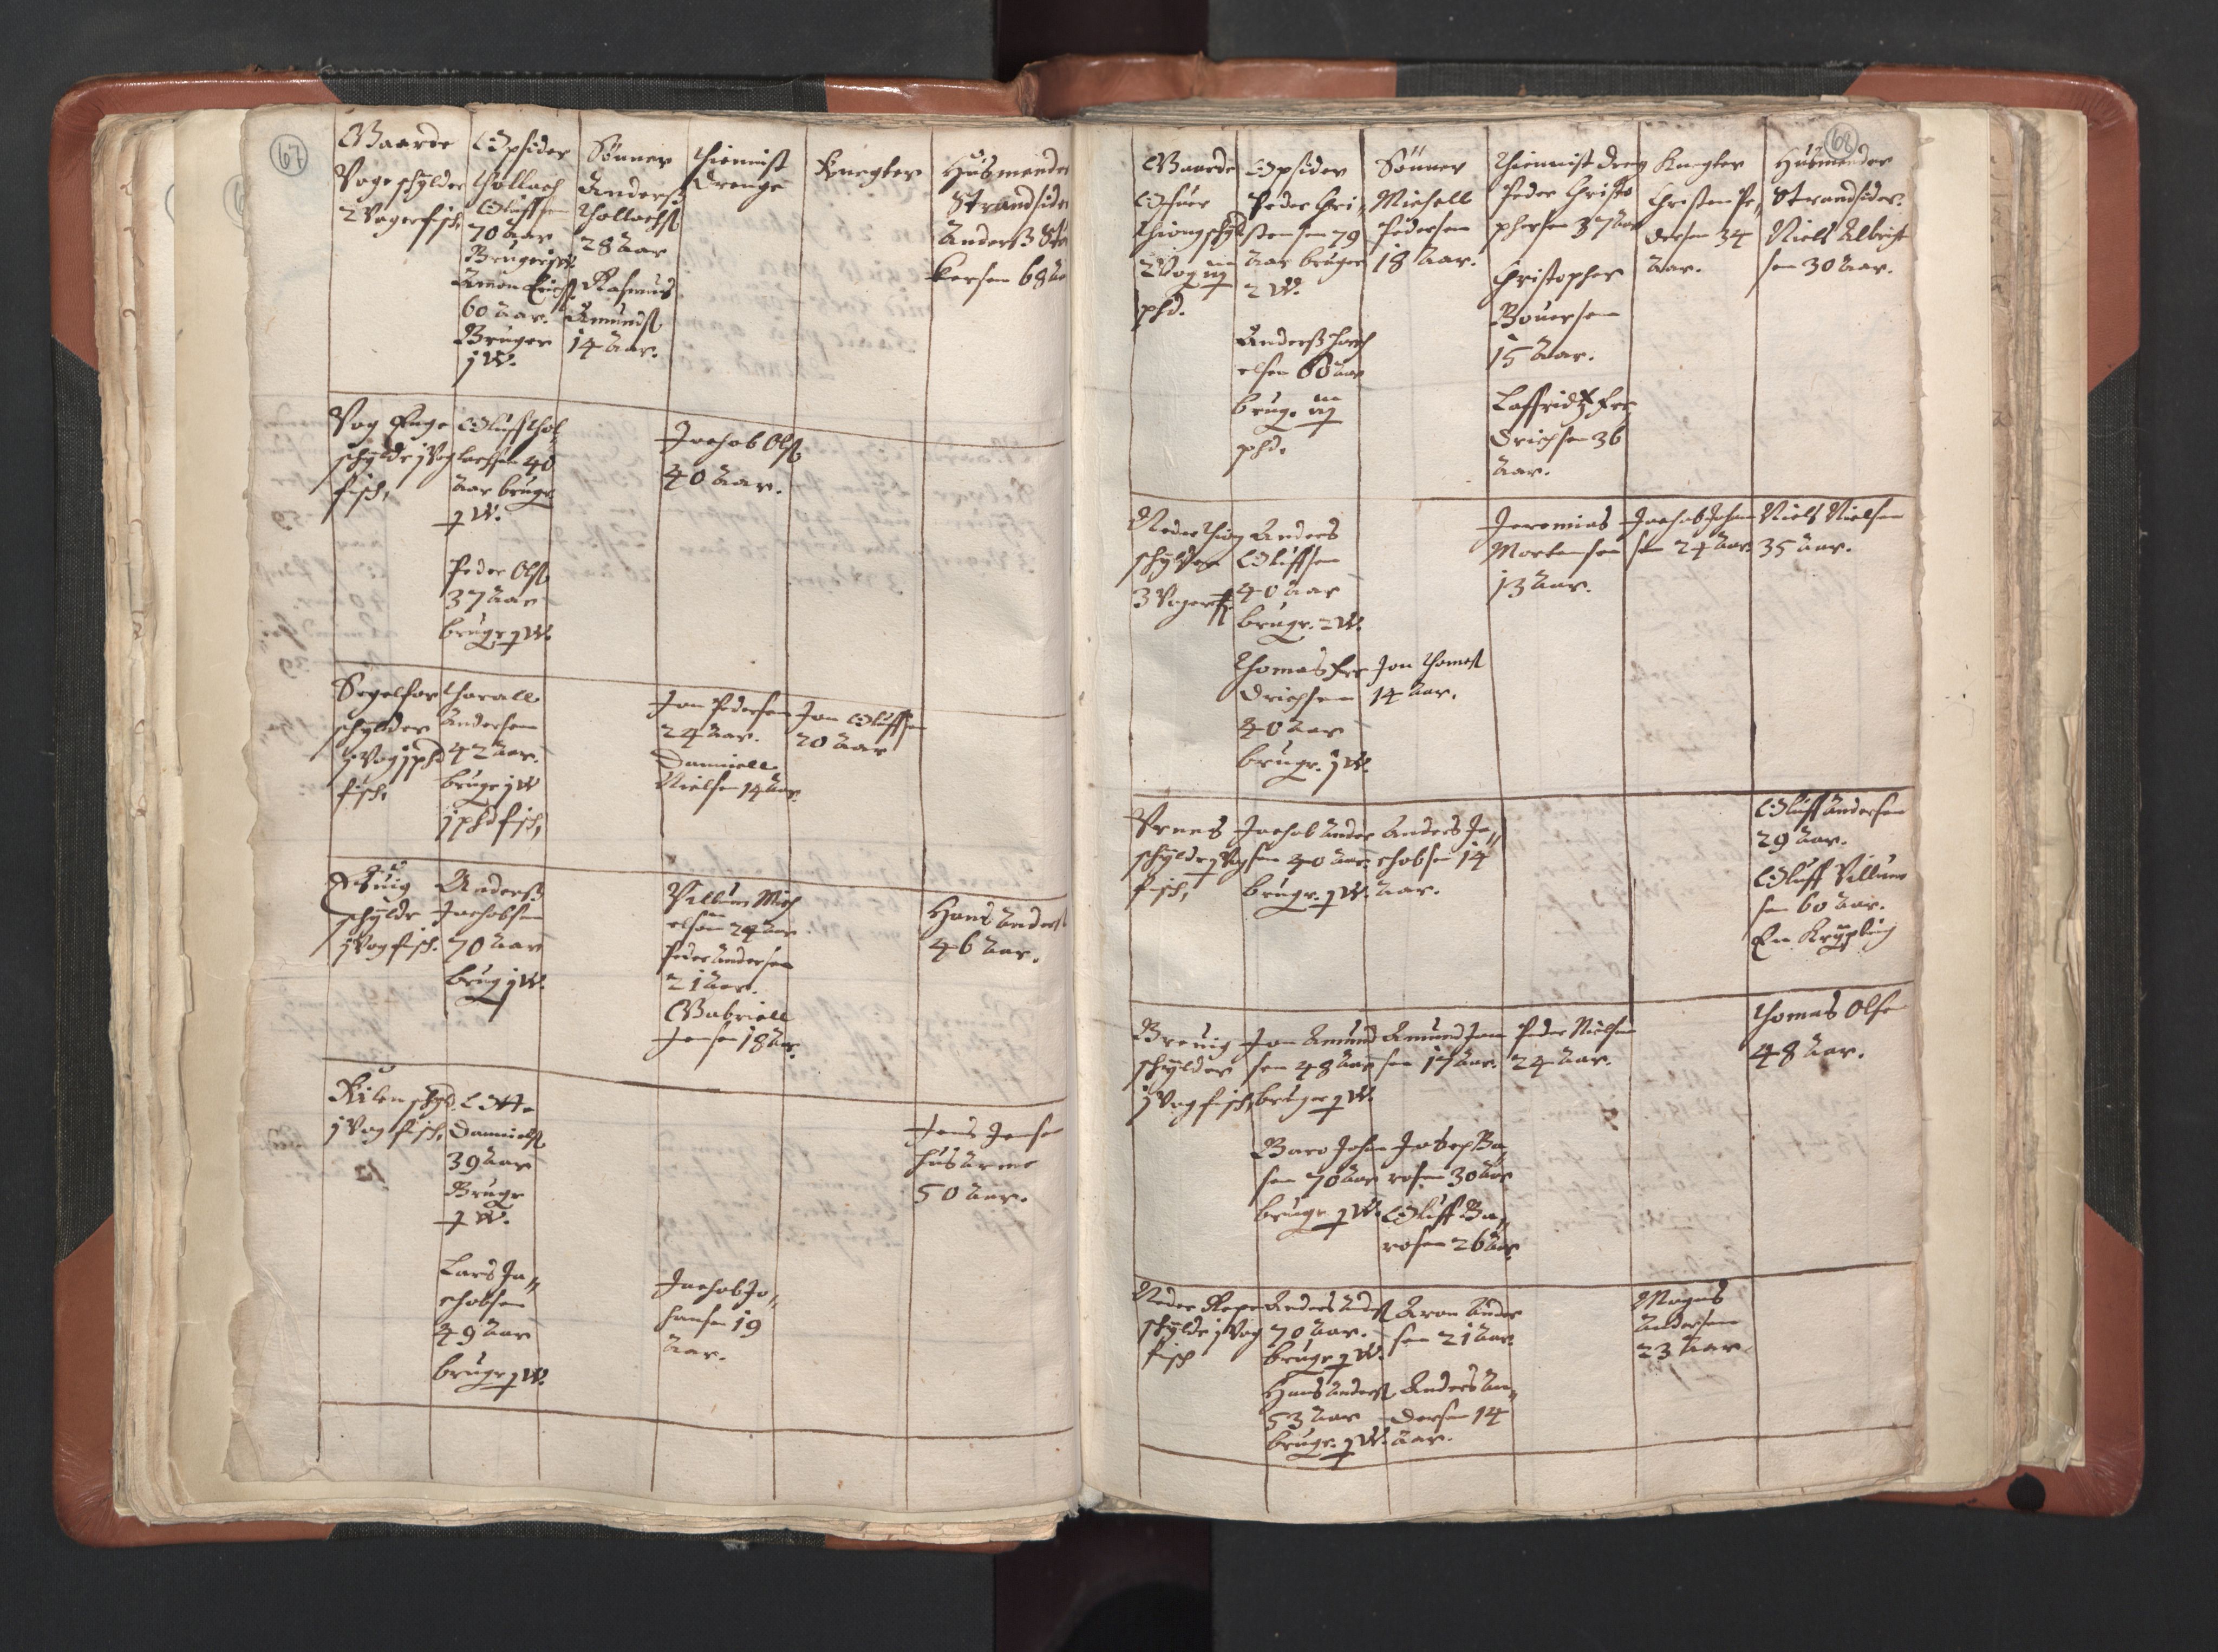 RA, Vicar's Census 1664-1666, no. 35: Helgeland deanery and Salten deanery, 1664-1666, p. 67-68